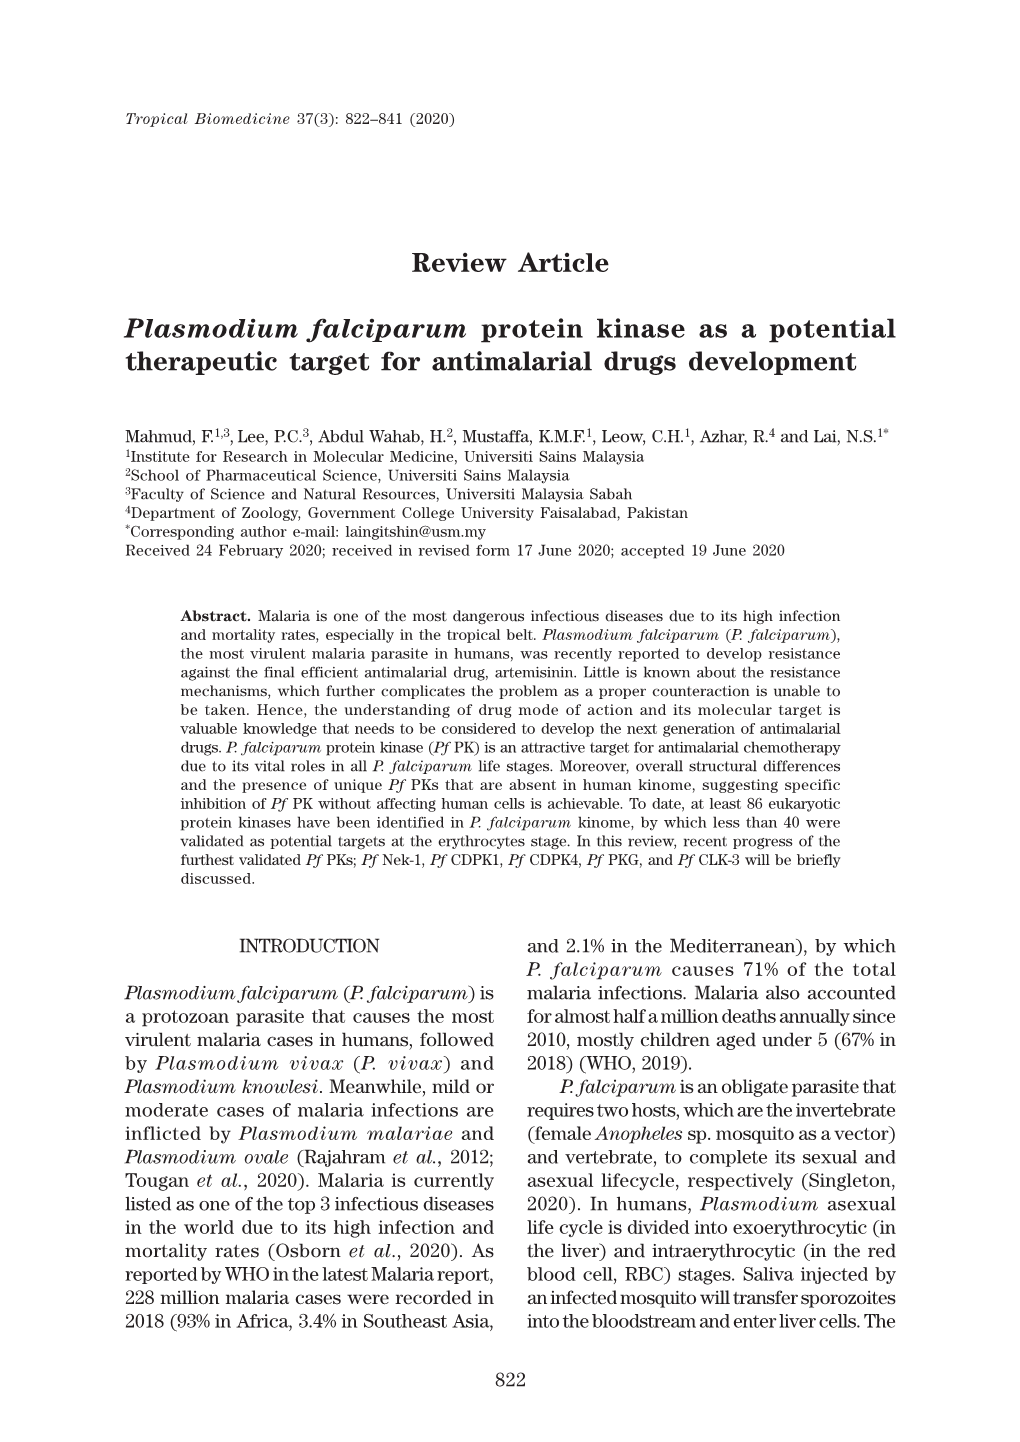 Plasmodium Falciparum Protein Kinase As a Potential Therapeutic Target for Antimalarial Drugs Development